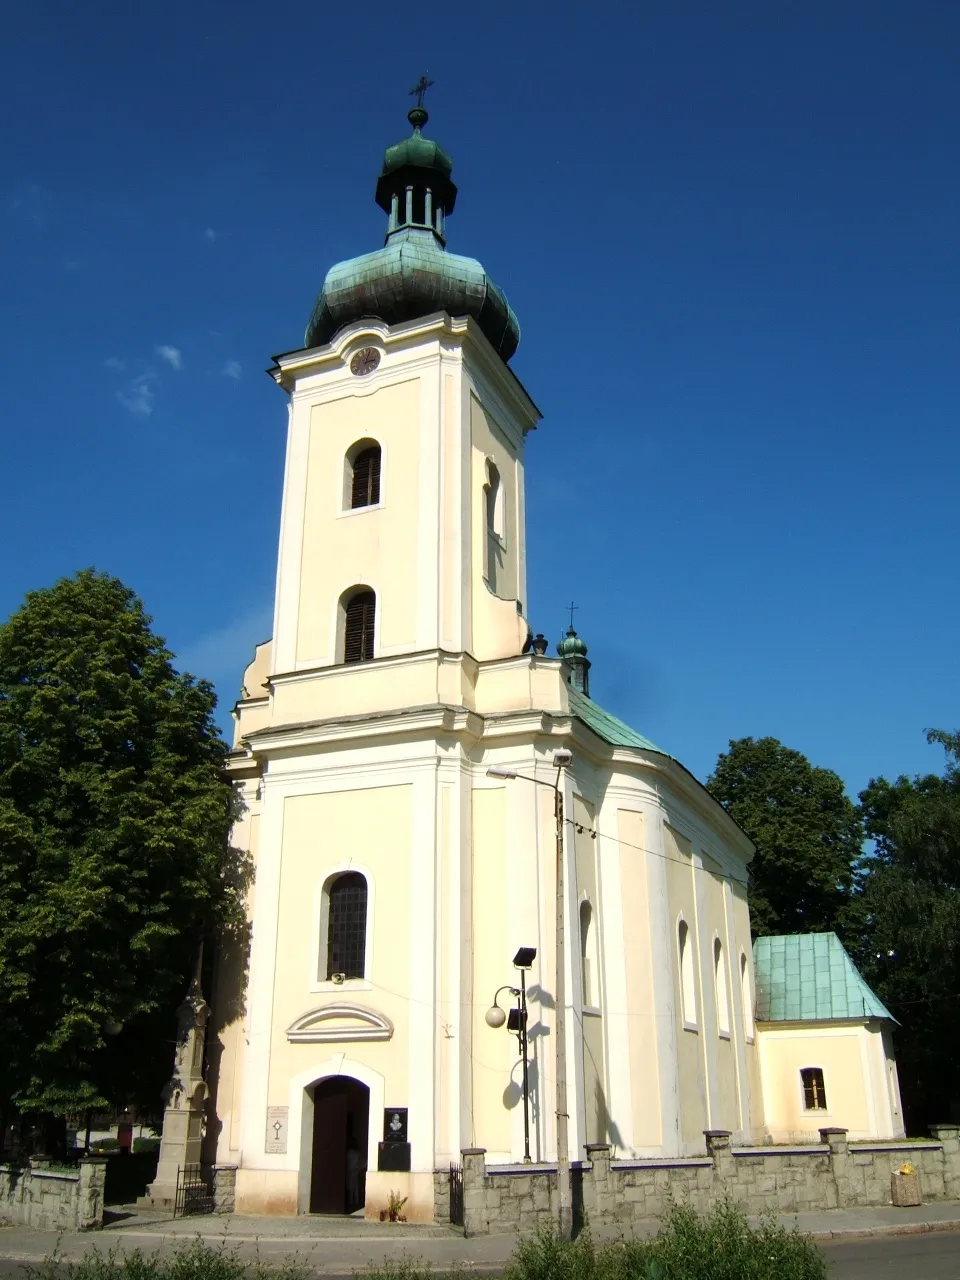 Photo showing: Sanctuary of Our Lady of Lourdes in Kochłowice, district of Ruda Śląska (Poland).